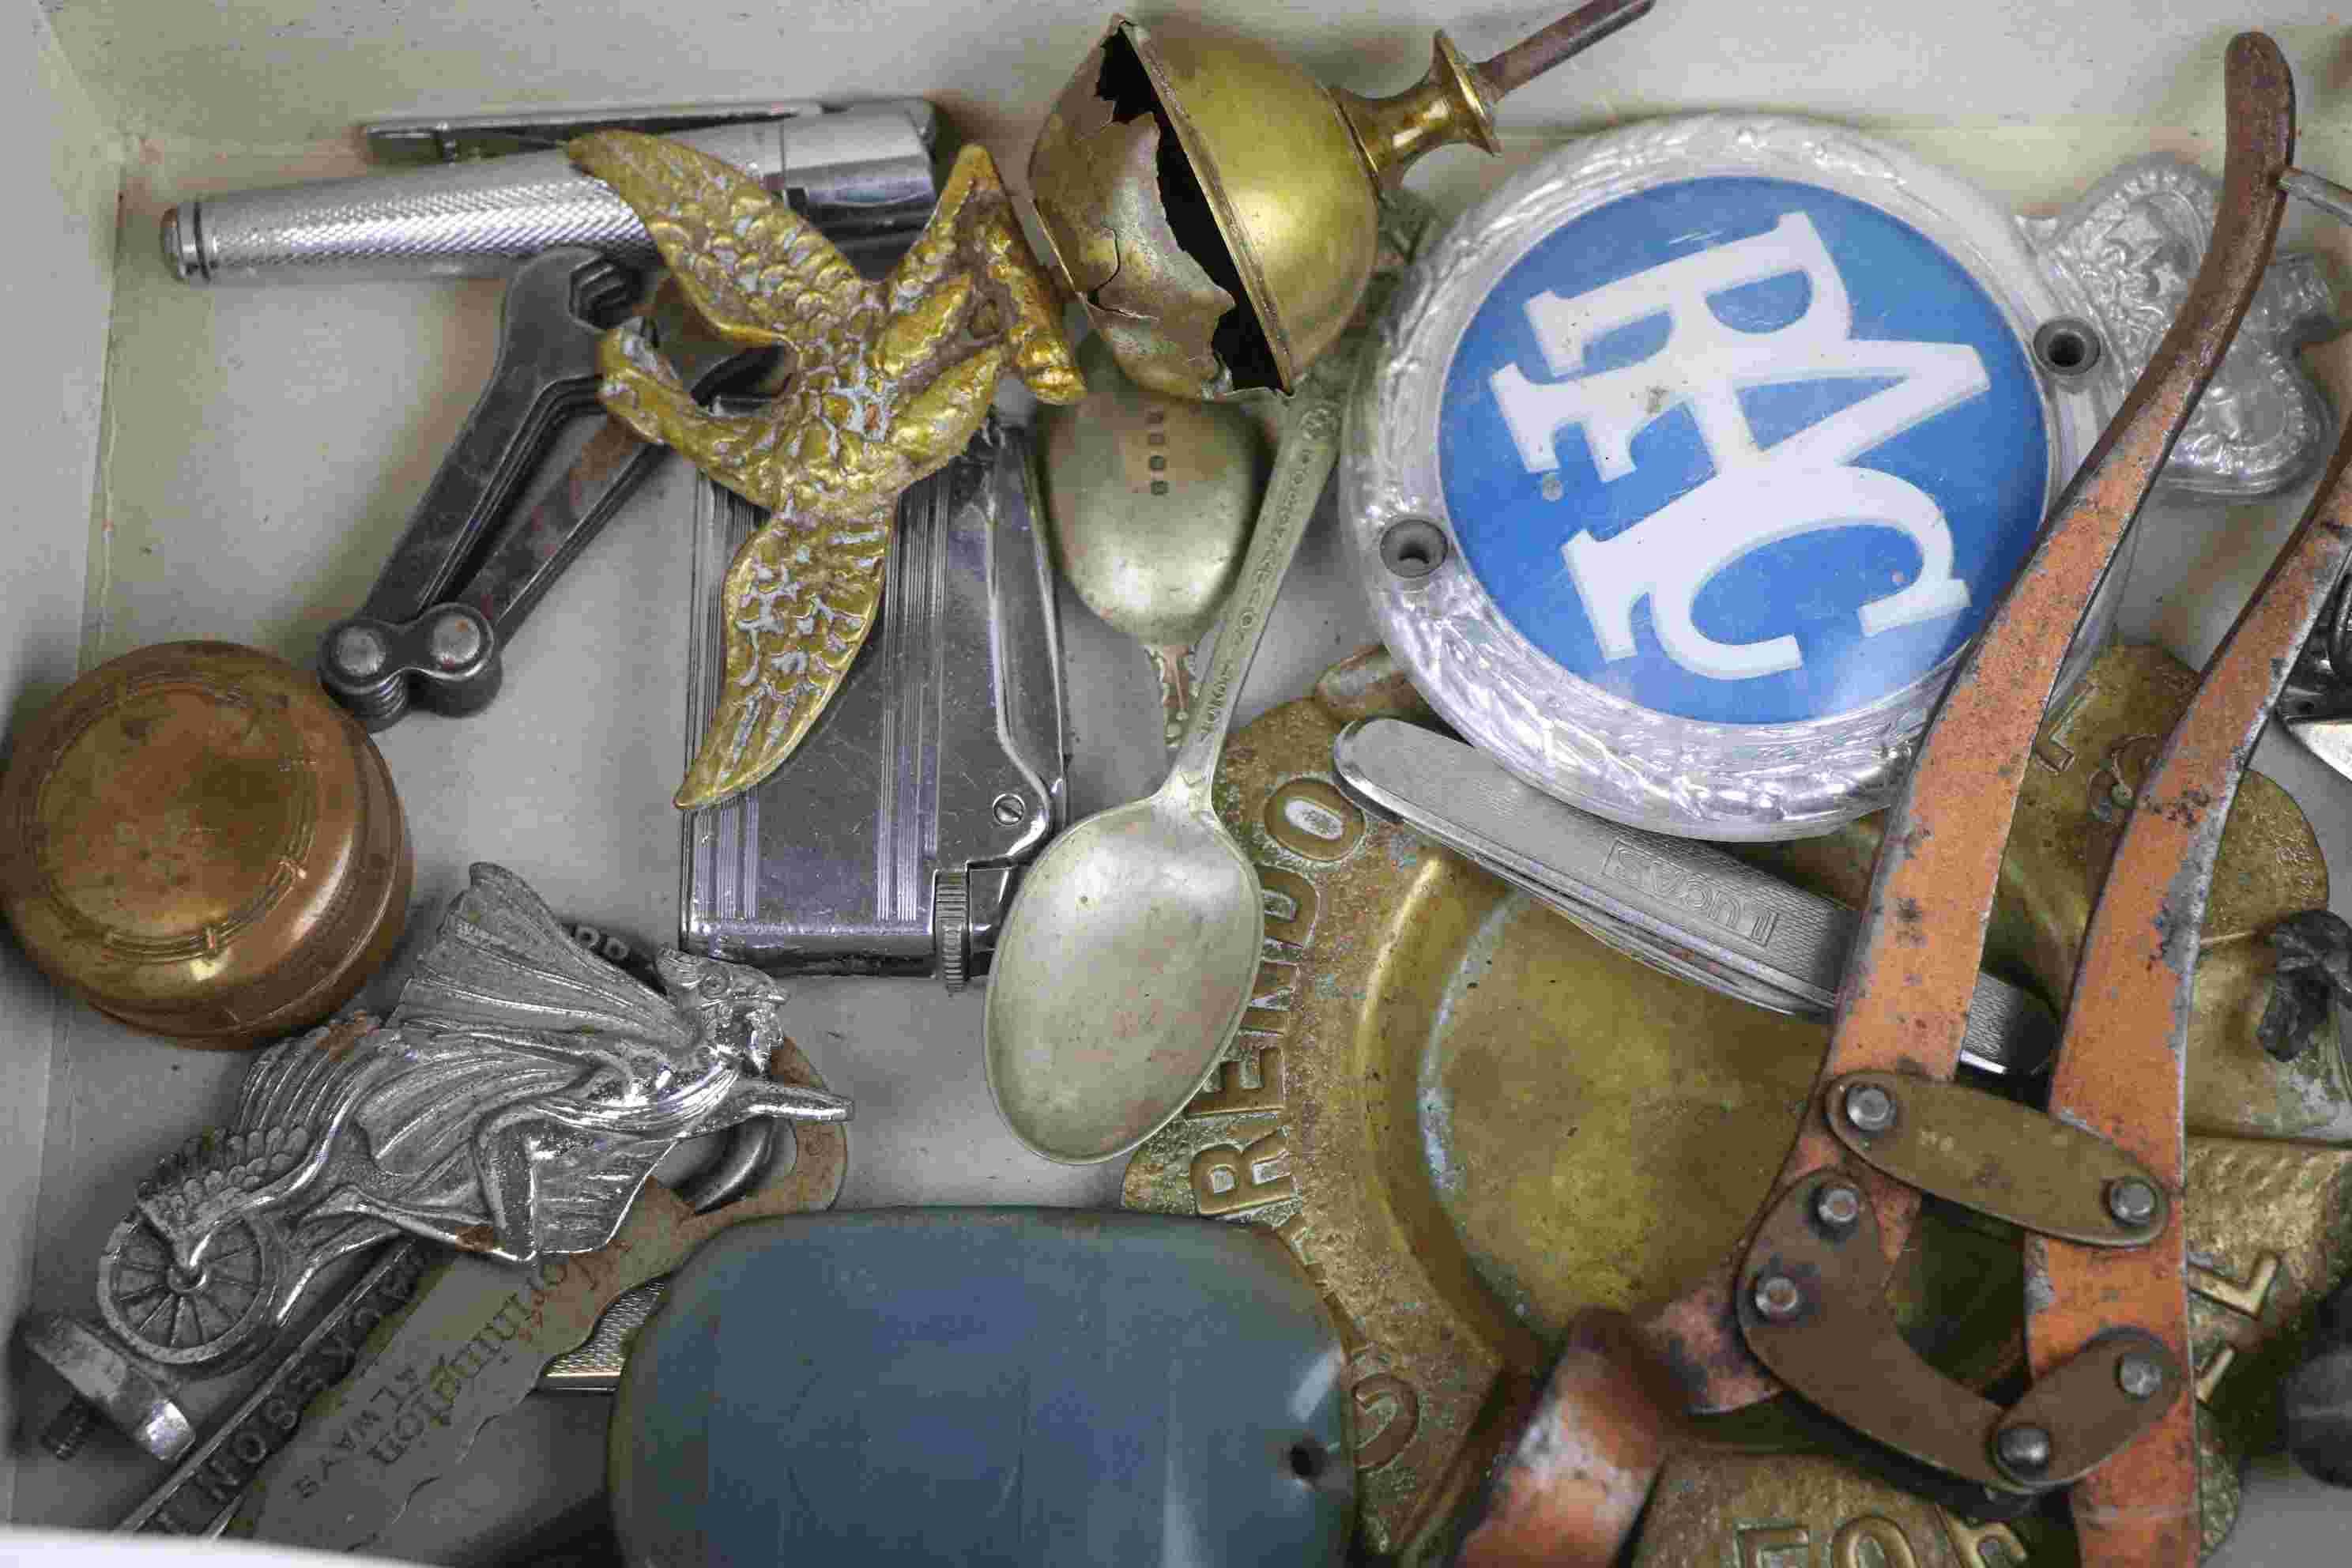 Mixed collectables to include RAC car badge, Penknives, Bottle opener, ashtrays etc - Image 2 of 3